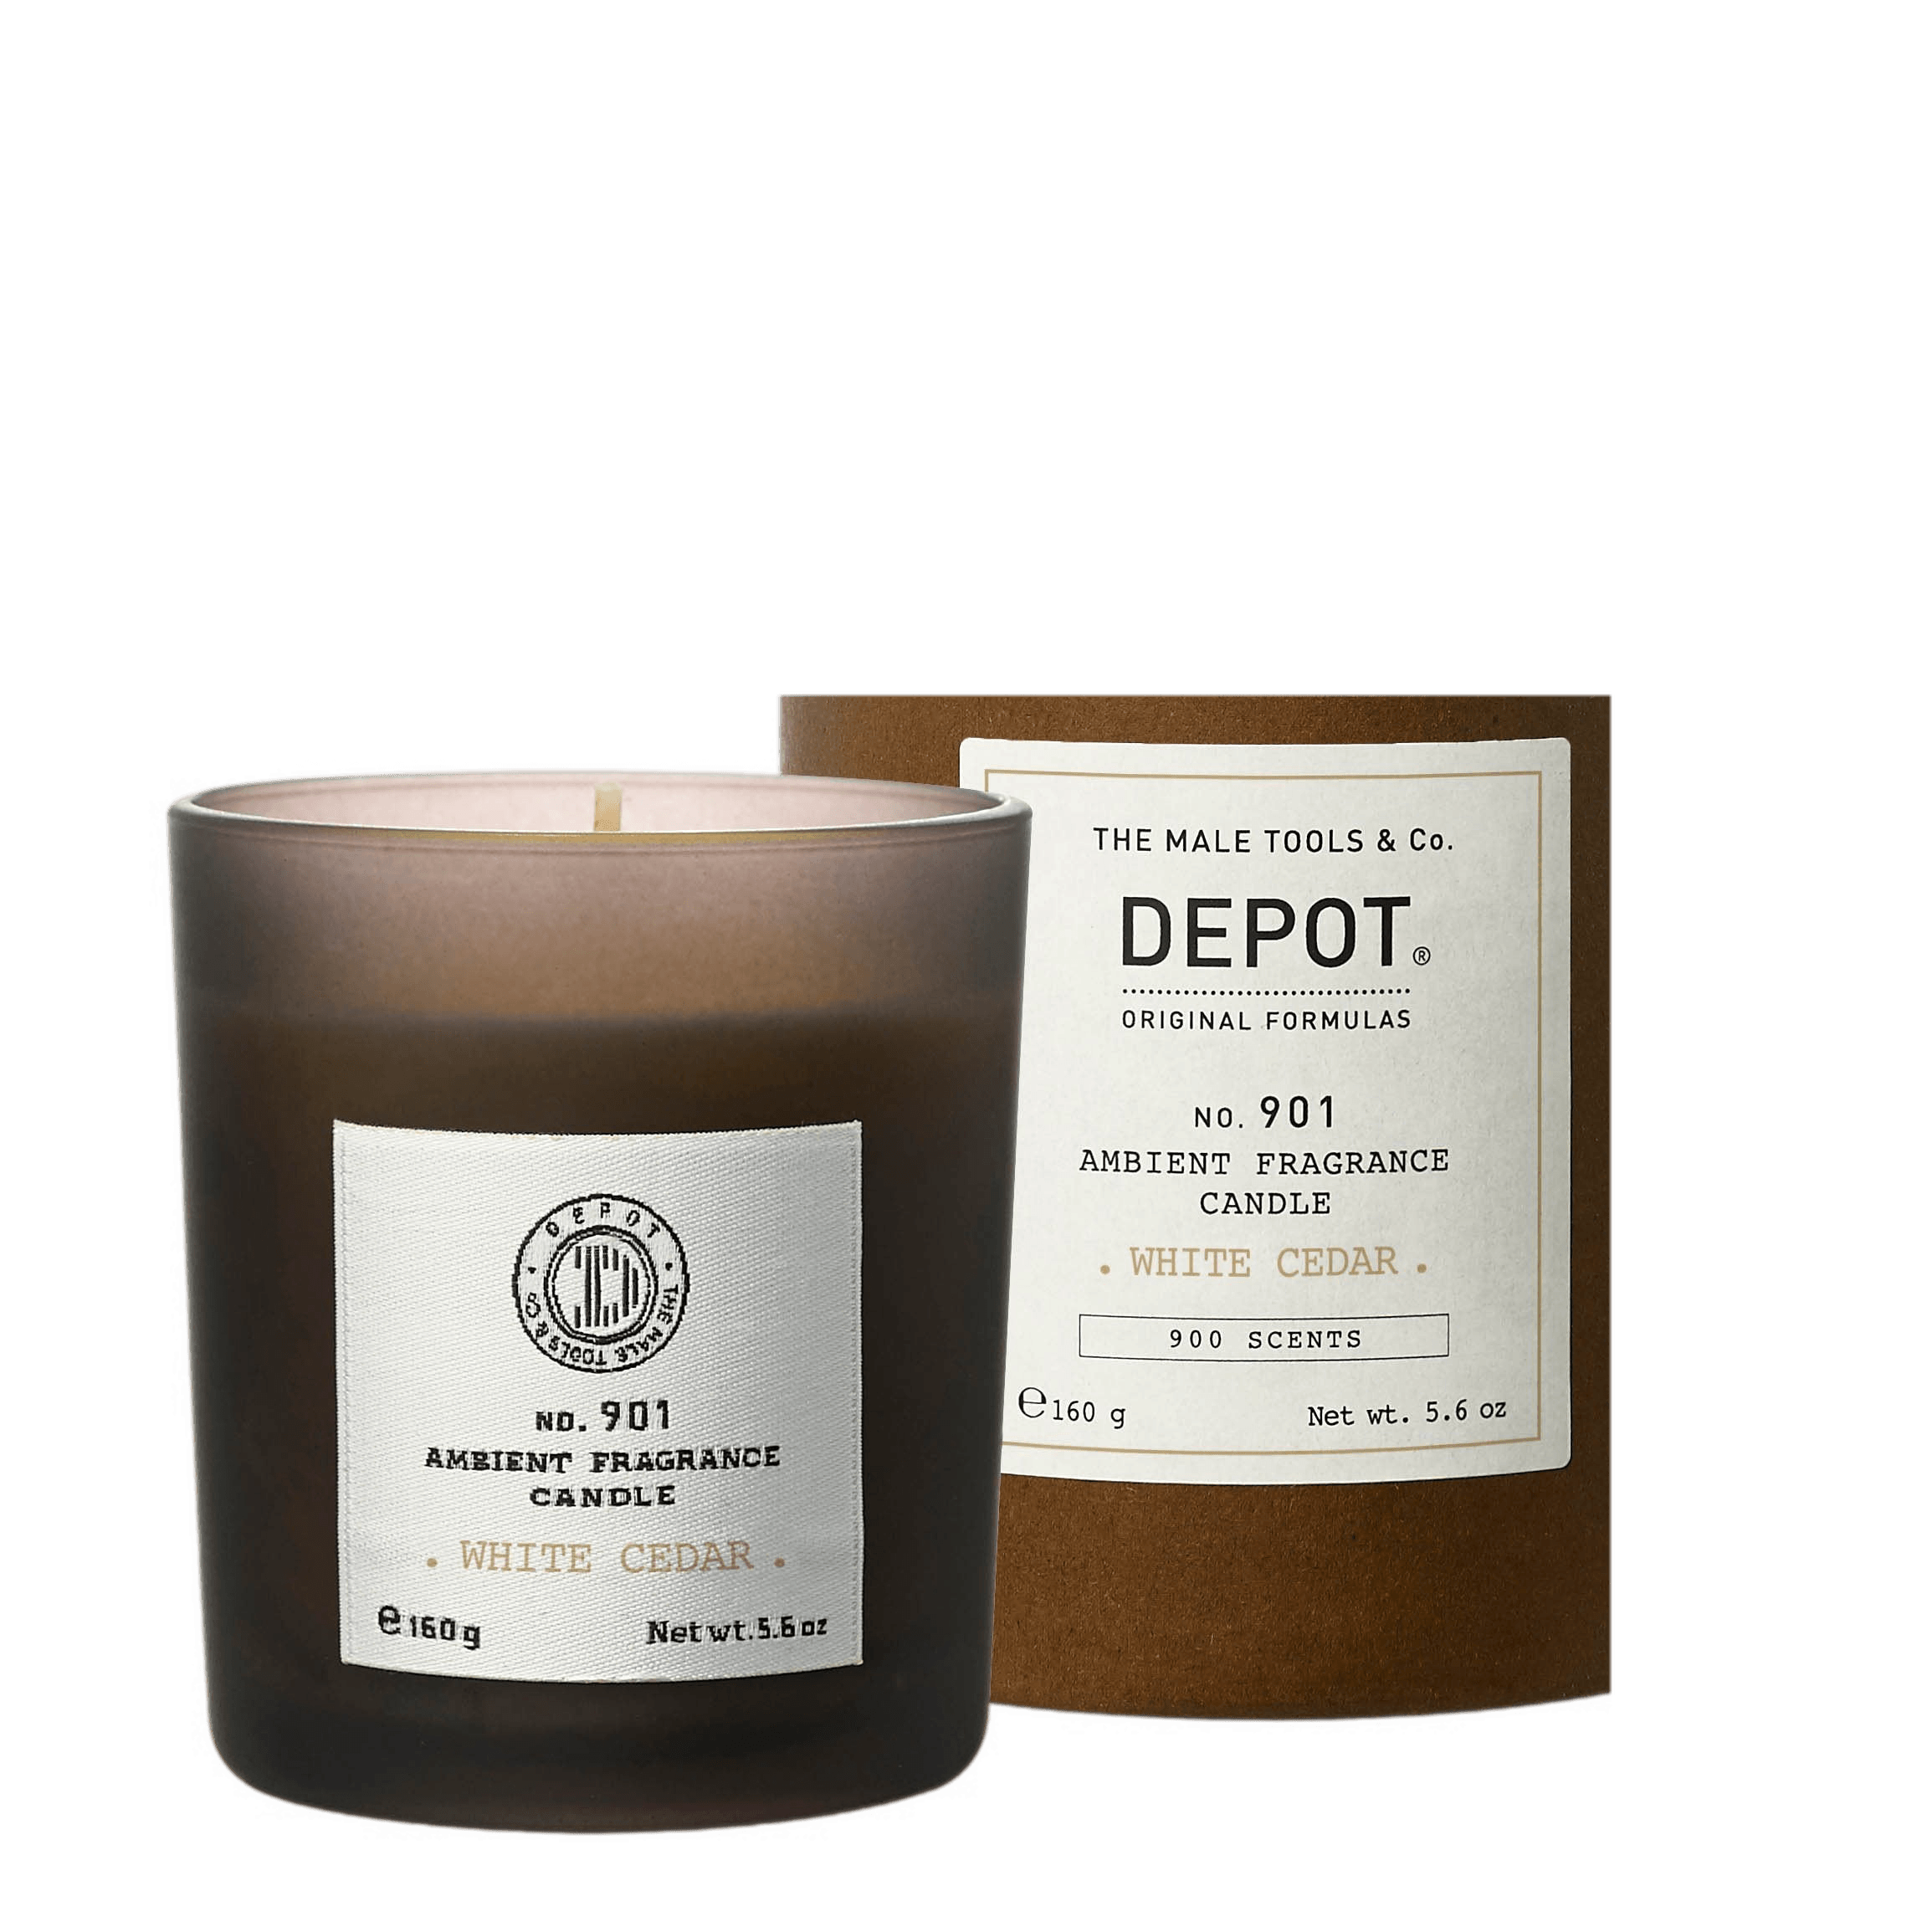 Depot No. 901 Ambient Fragrance Candle White Cedar